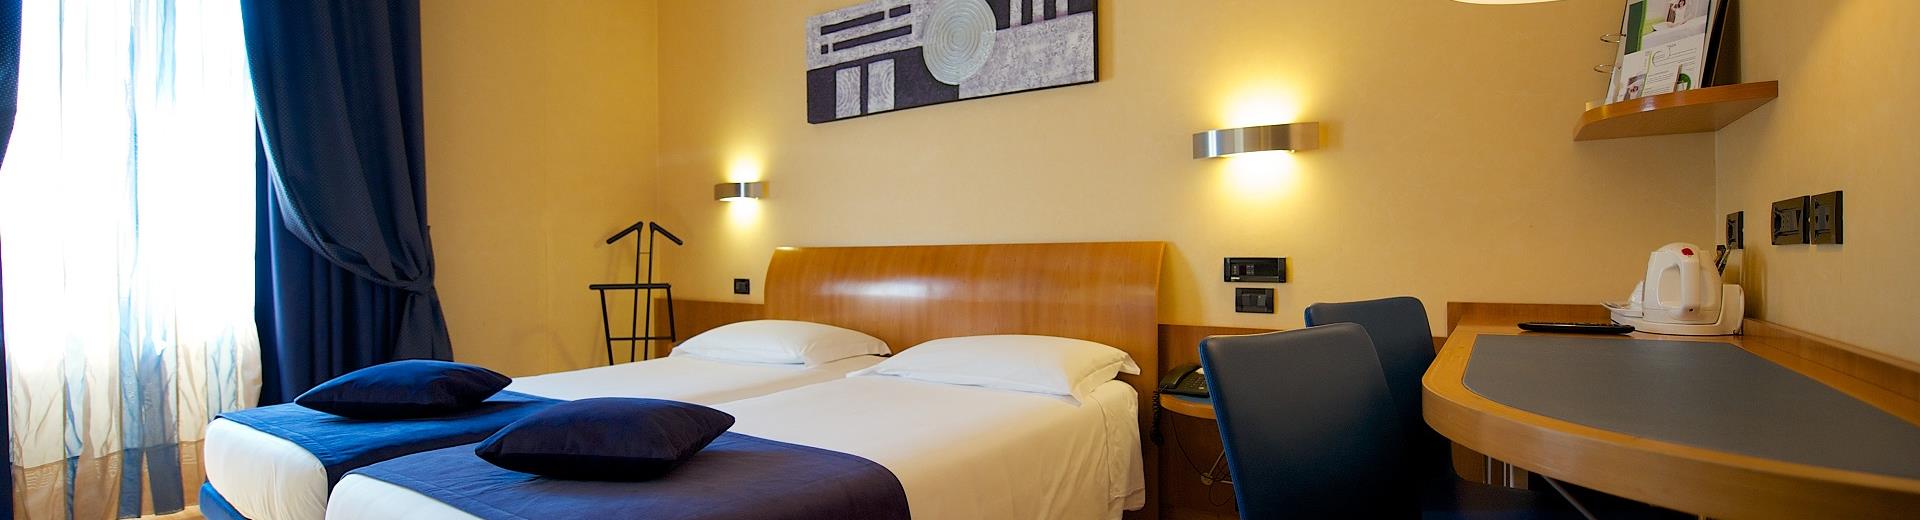 Twin rooms at Best Western Hotel Luxor in Torino